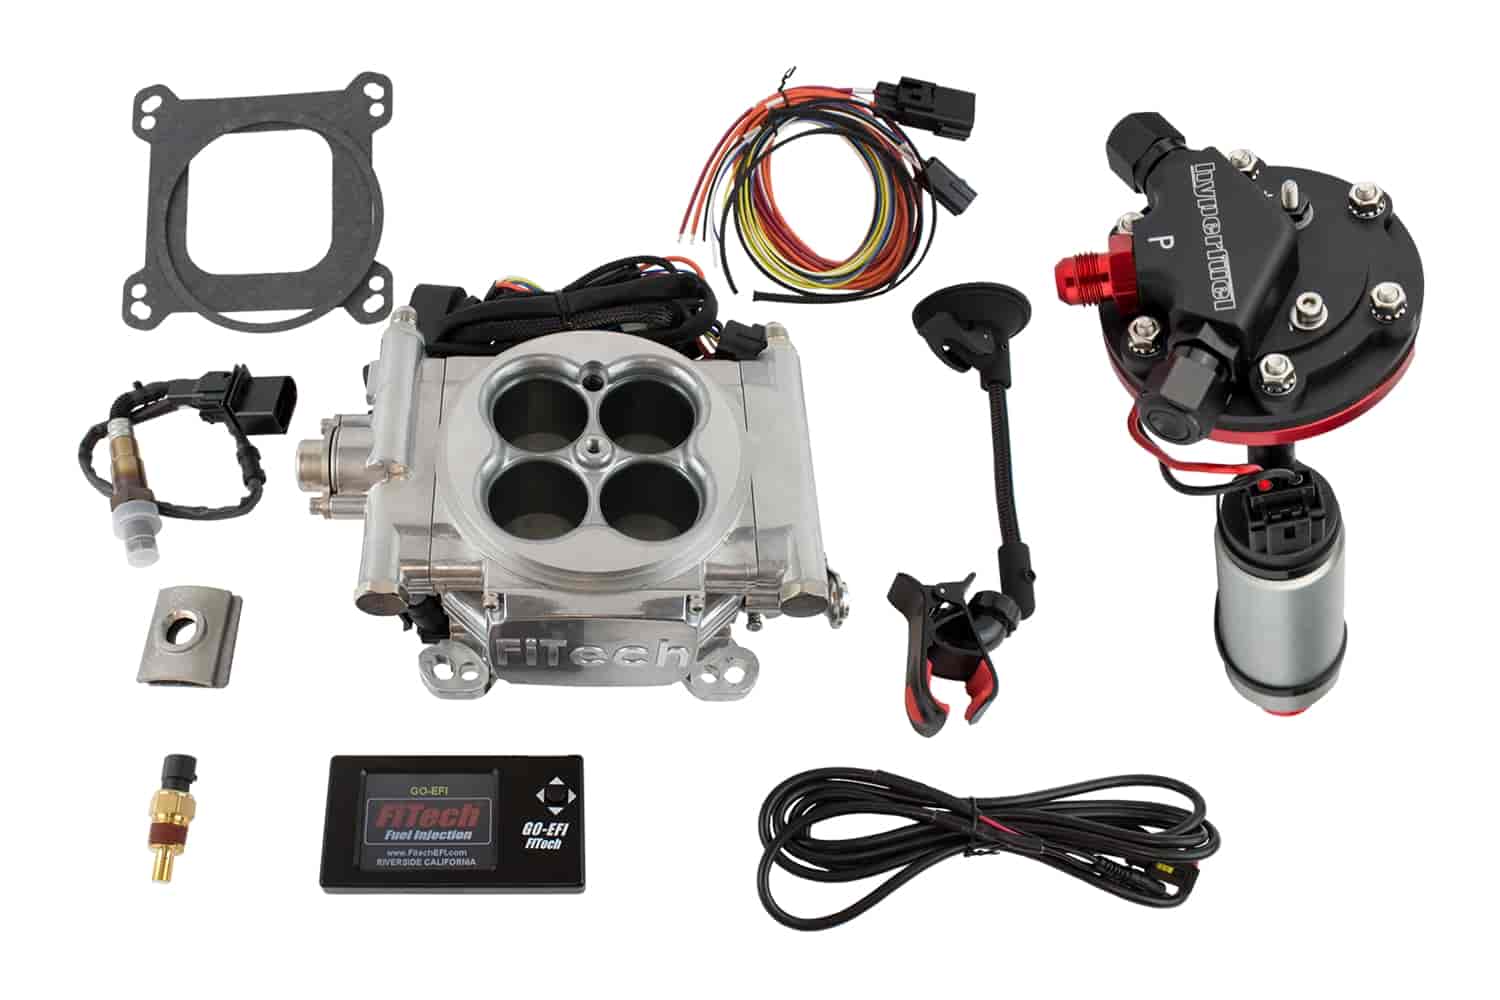 Go EFI-4 600 HP Throttle Body System Master Kit with Hy-Fuel Tight-Fit In-Tank Retrofit Kit